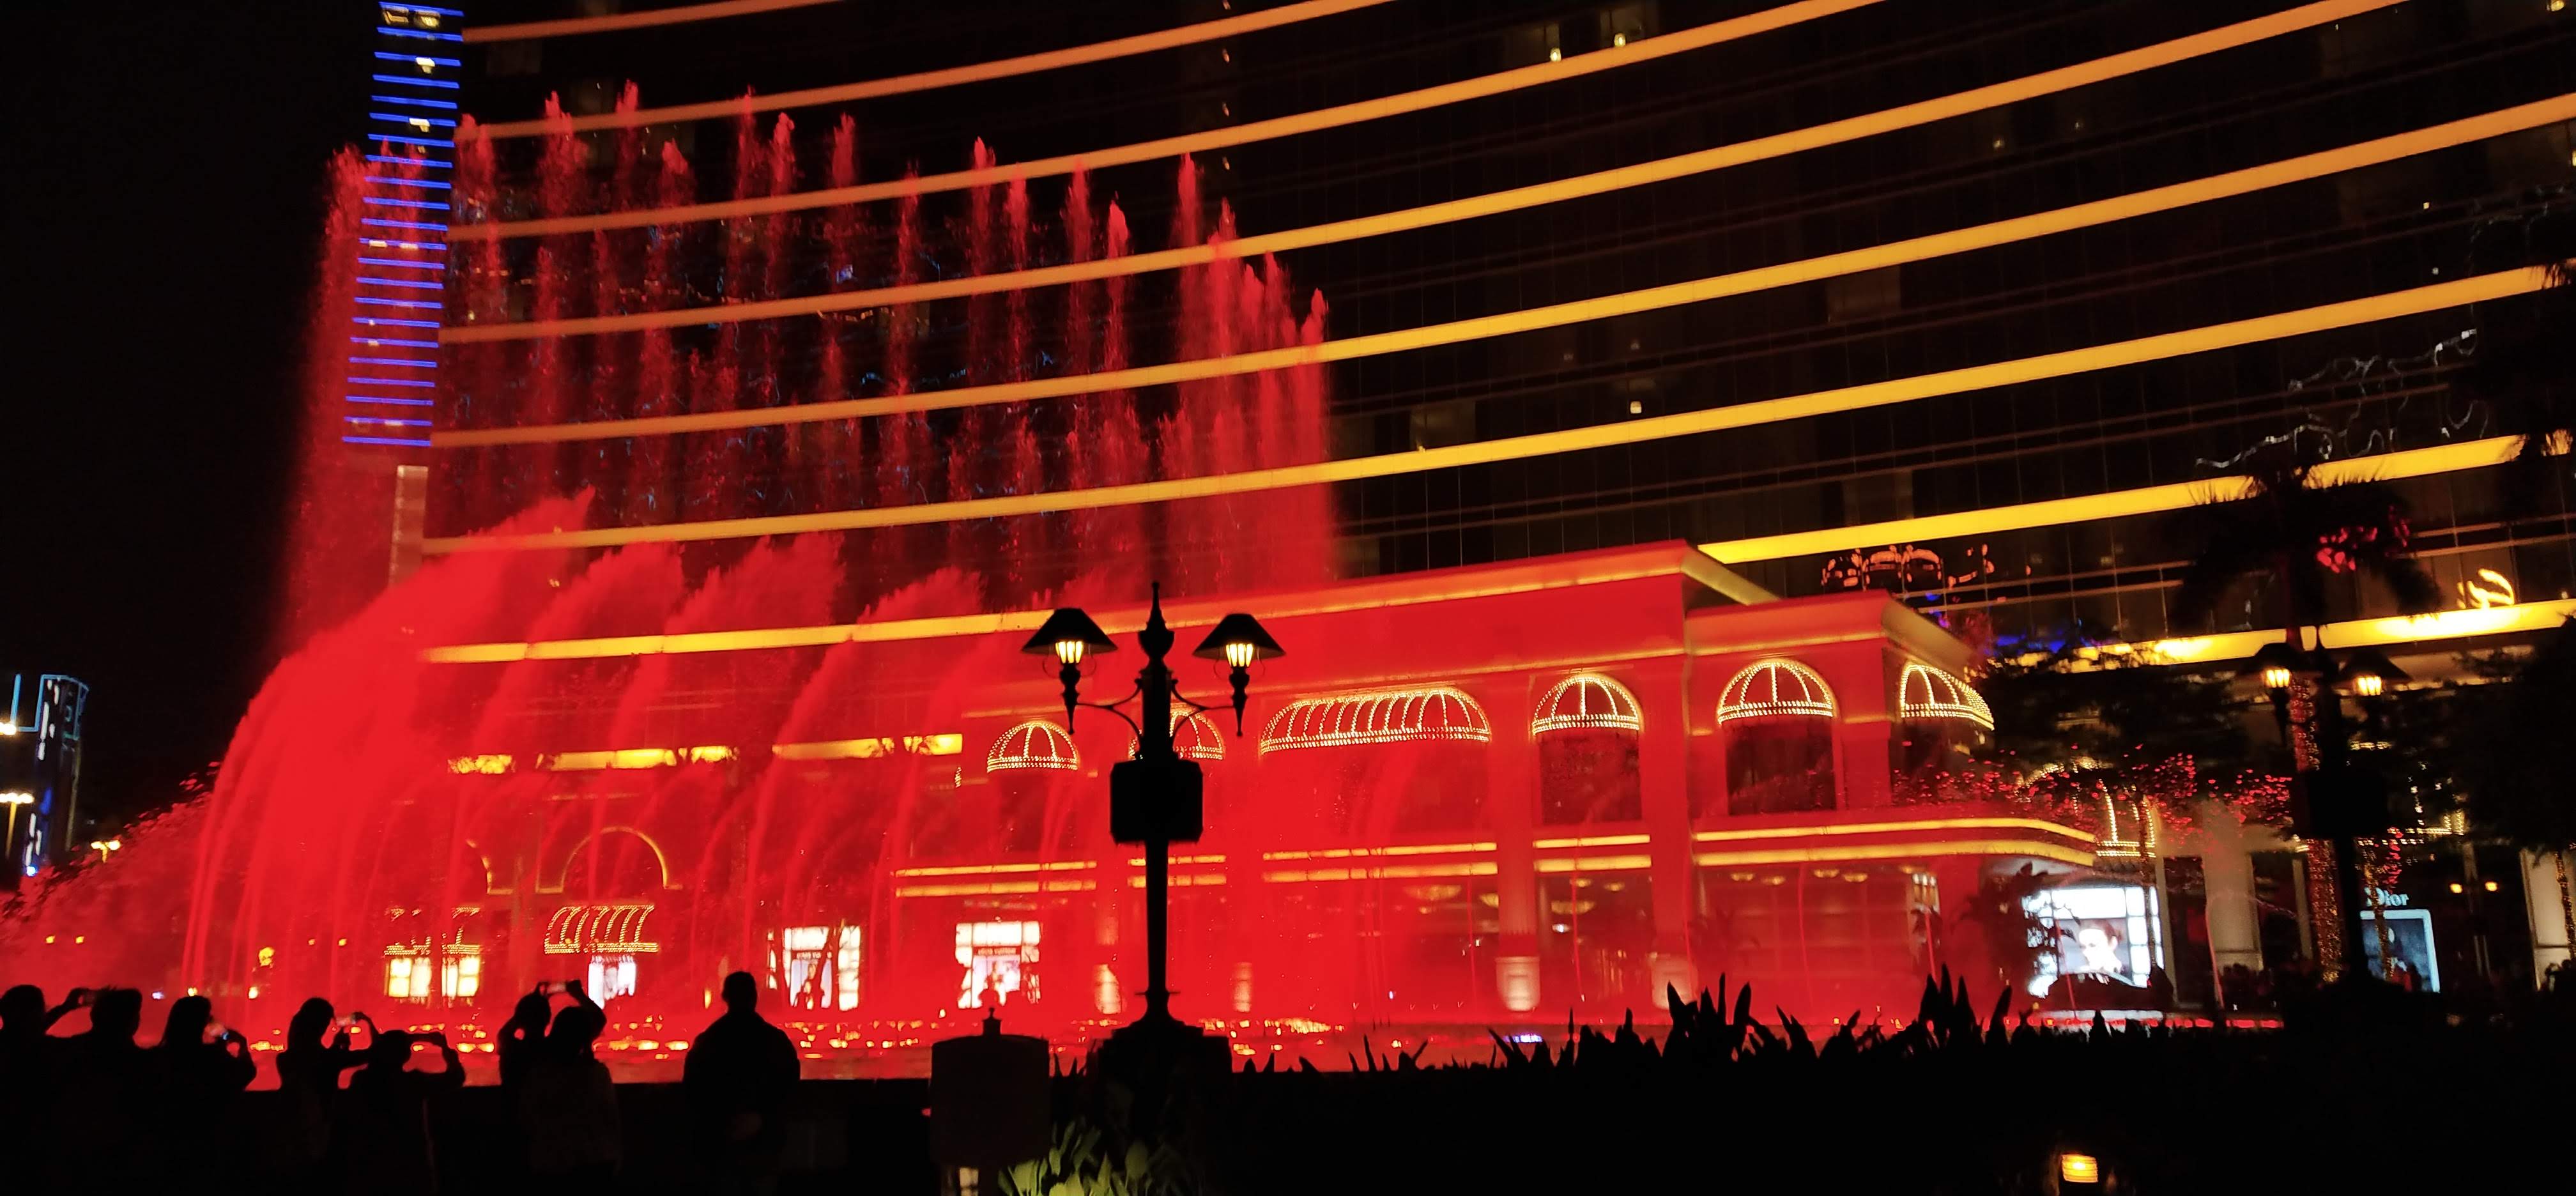 The daily light and water show at Wynn Macau